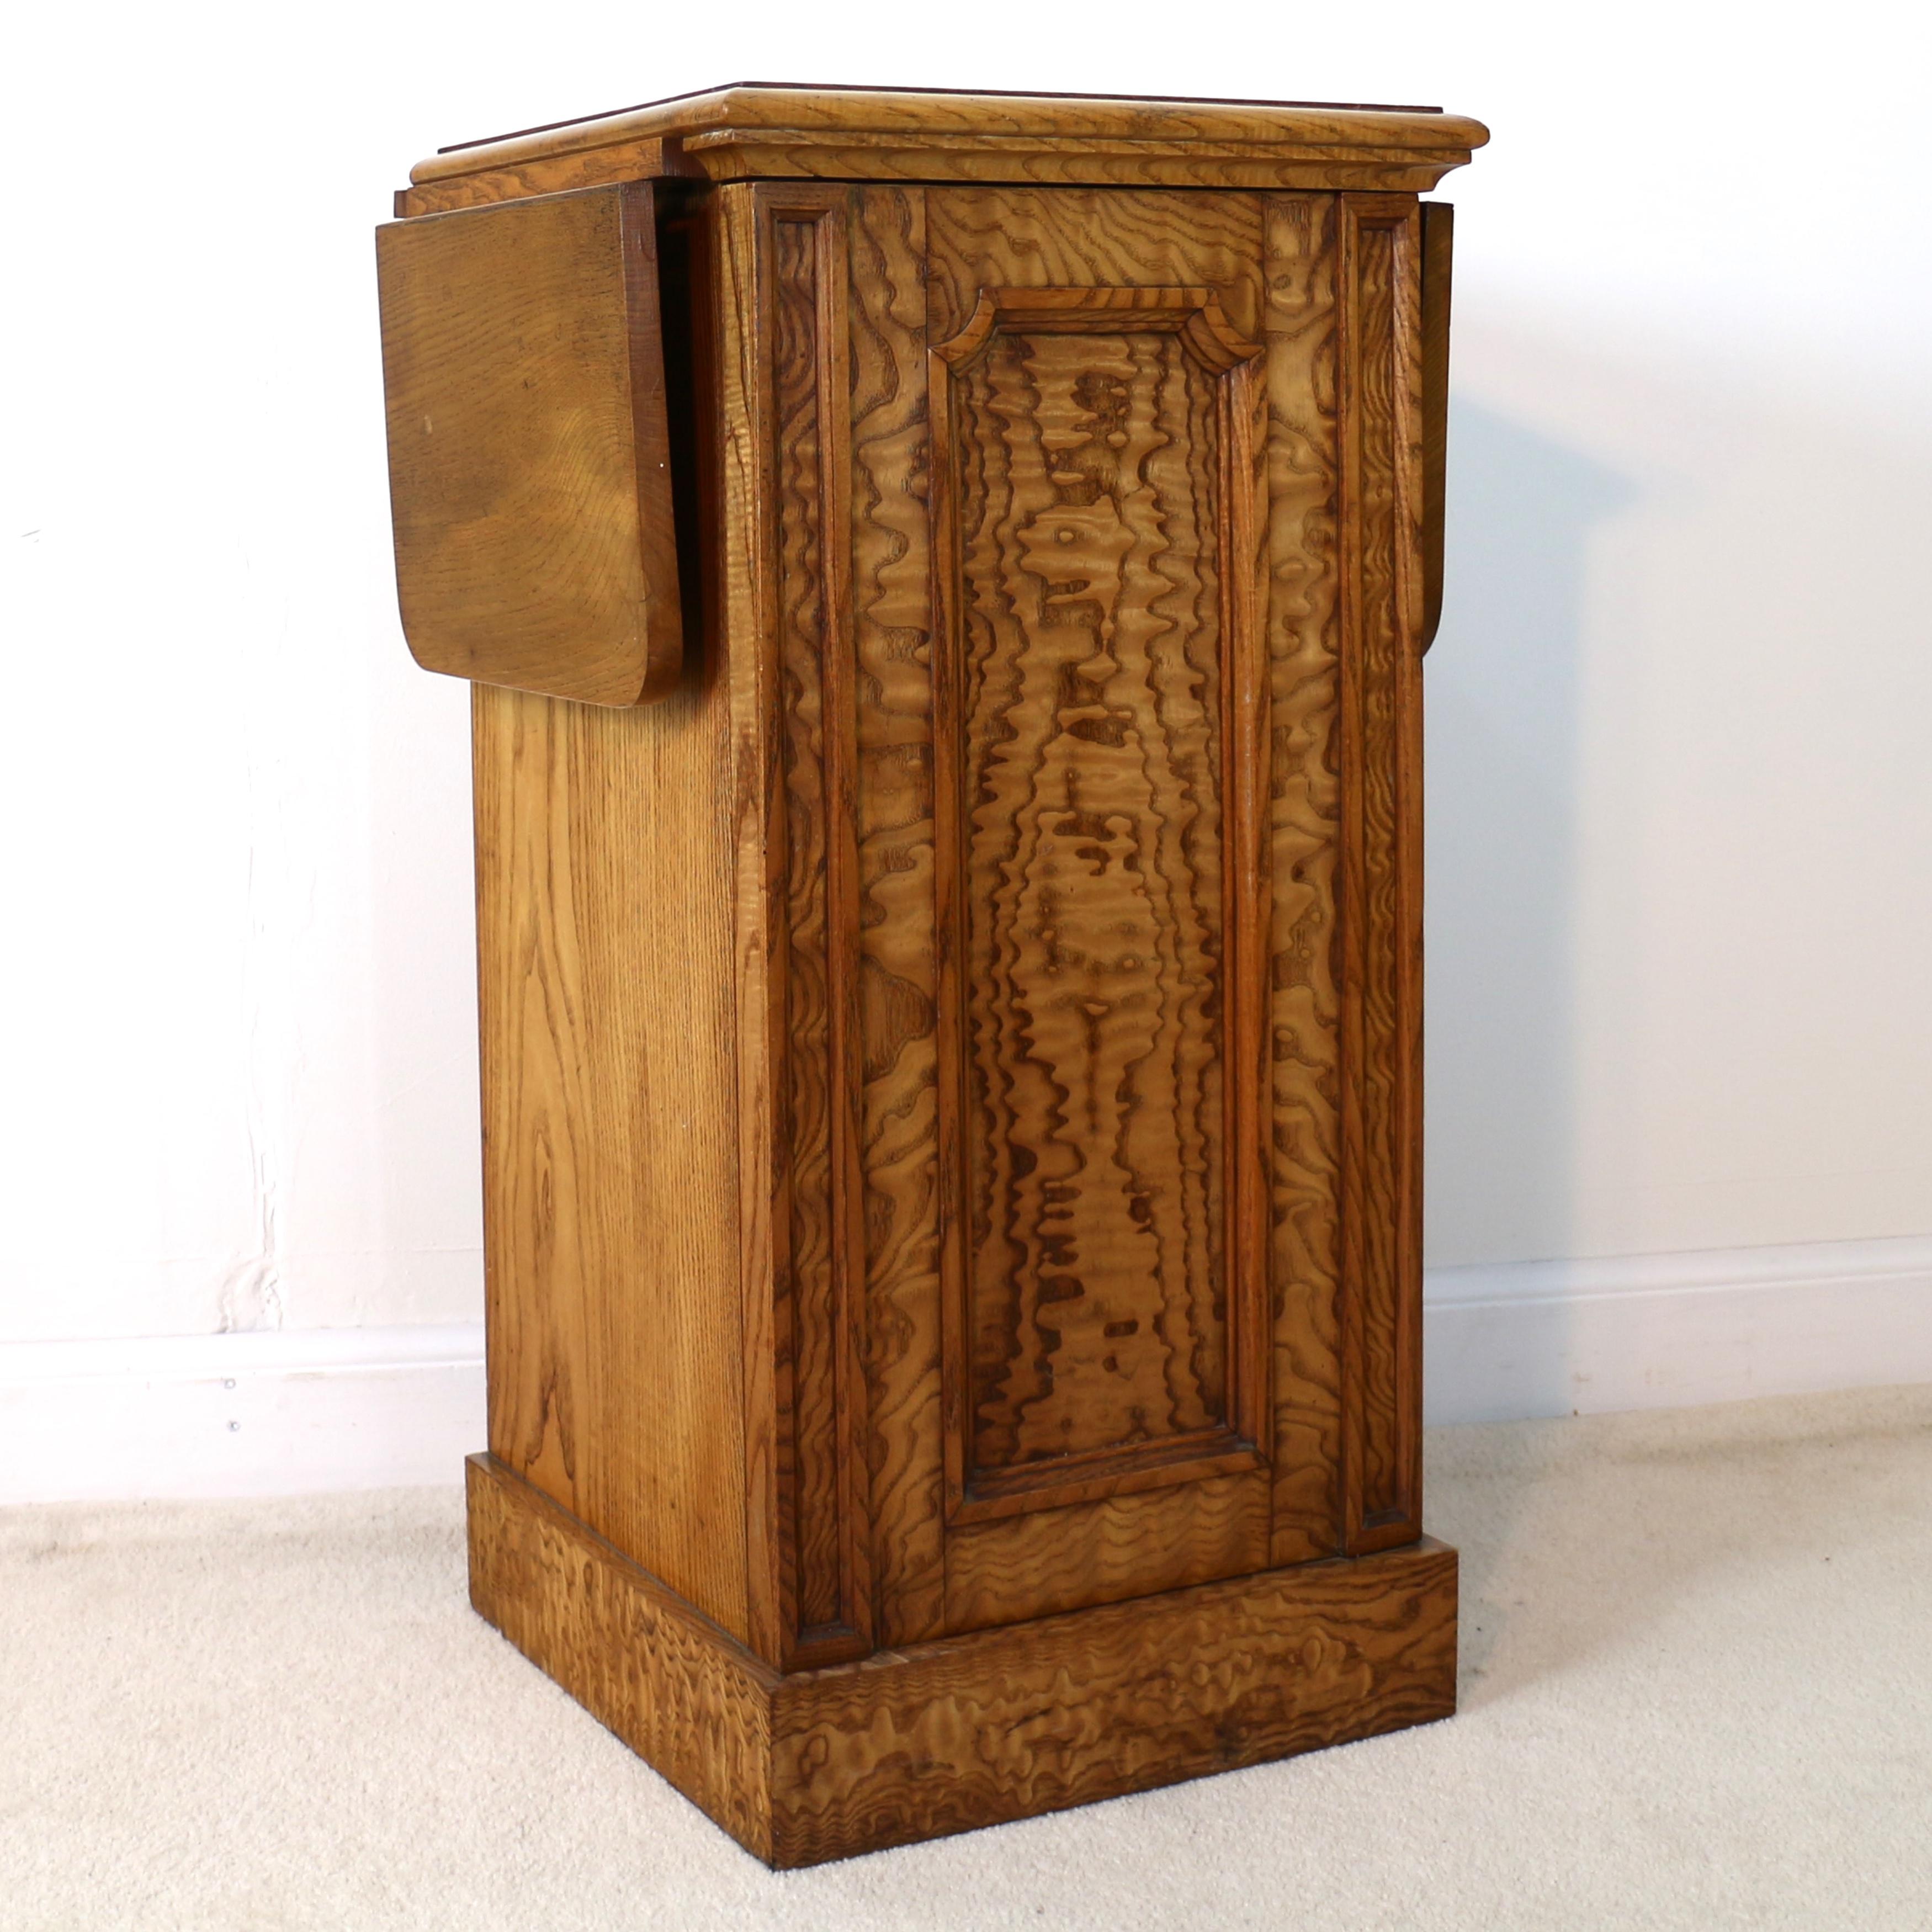 An unusual Scottish William IV figured elm bedside cabinet or pot cupboard dating to circa 1830. The square top with a double moulded edge above a front displaying narrow panelled edges flanking a fielded panelled door with re-entrant corners and on